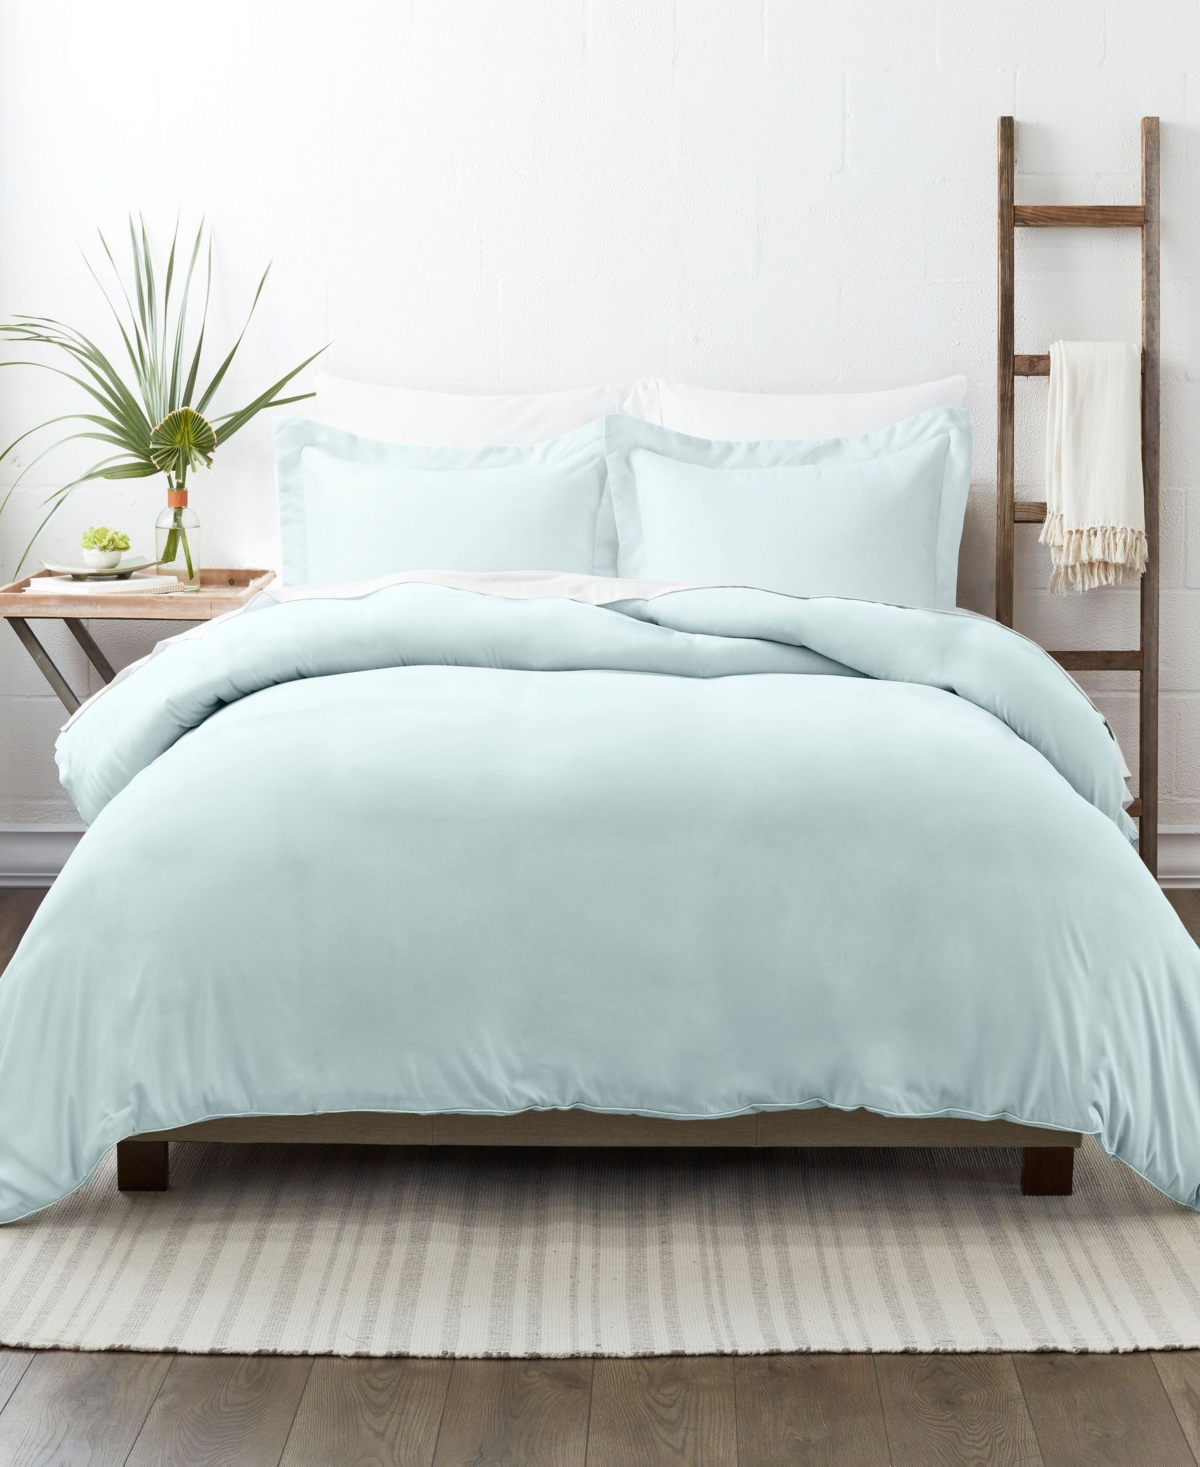 Ienjoy Home Dynamically Dashing Duvet Cover Set By The Home Collection, Full/queen In Mint